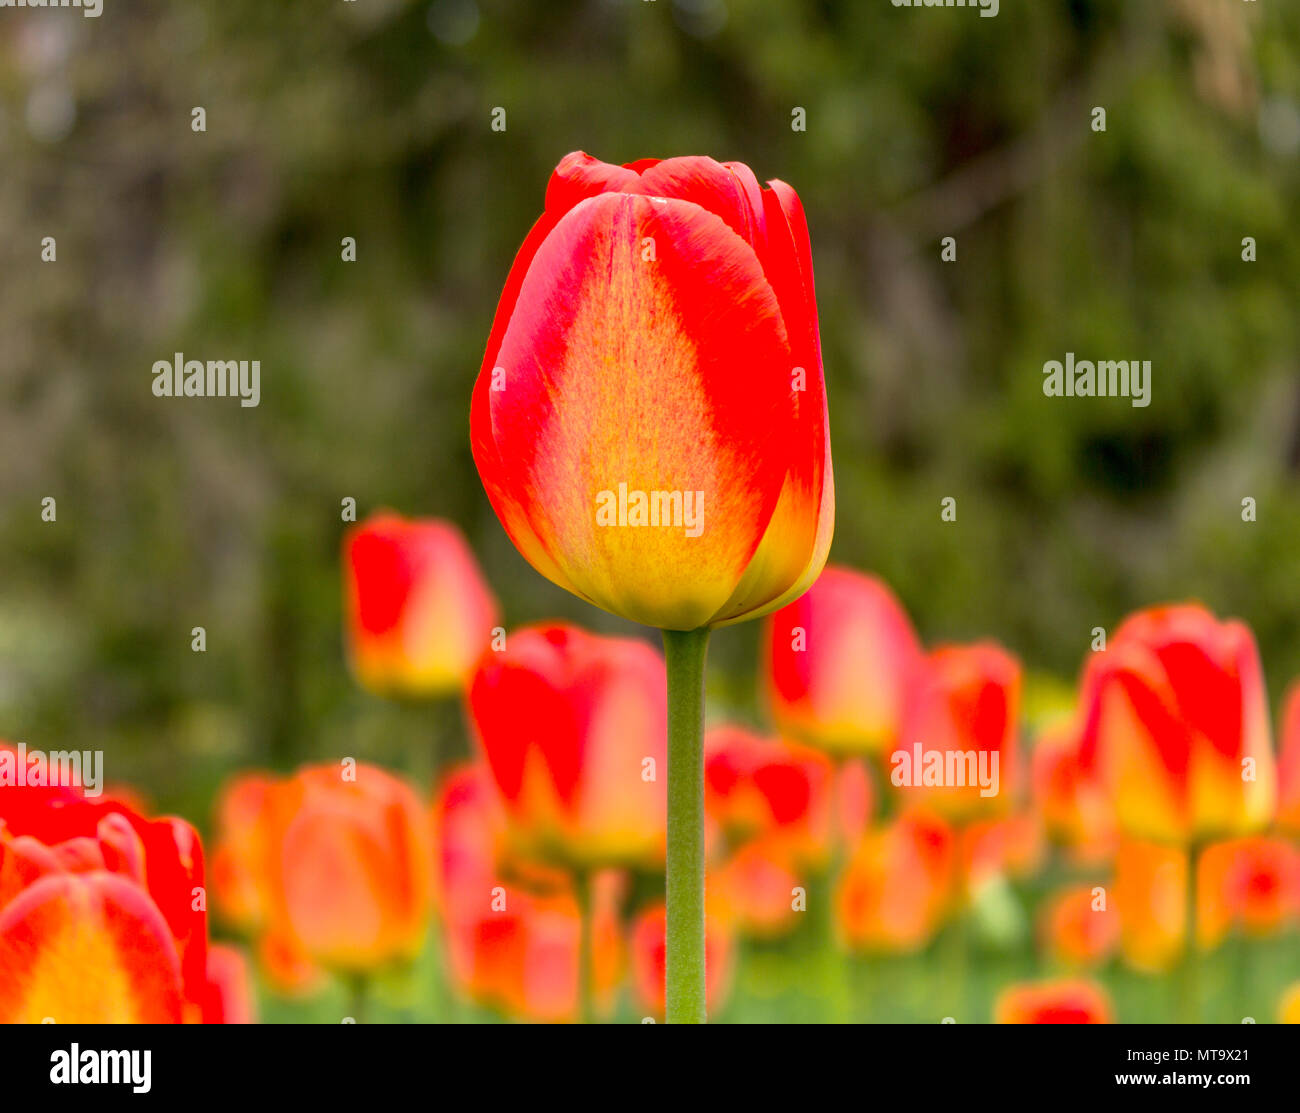 One red and yellow tulip in focus against a blurred background of other tulips Stock Photo